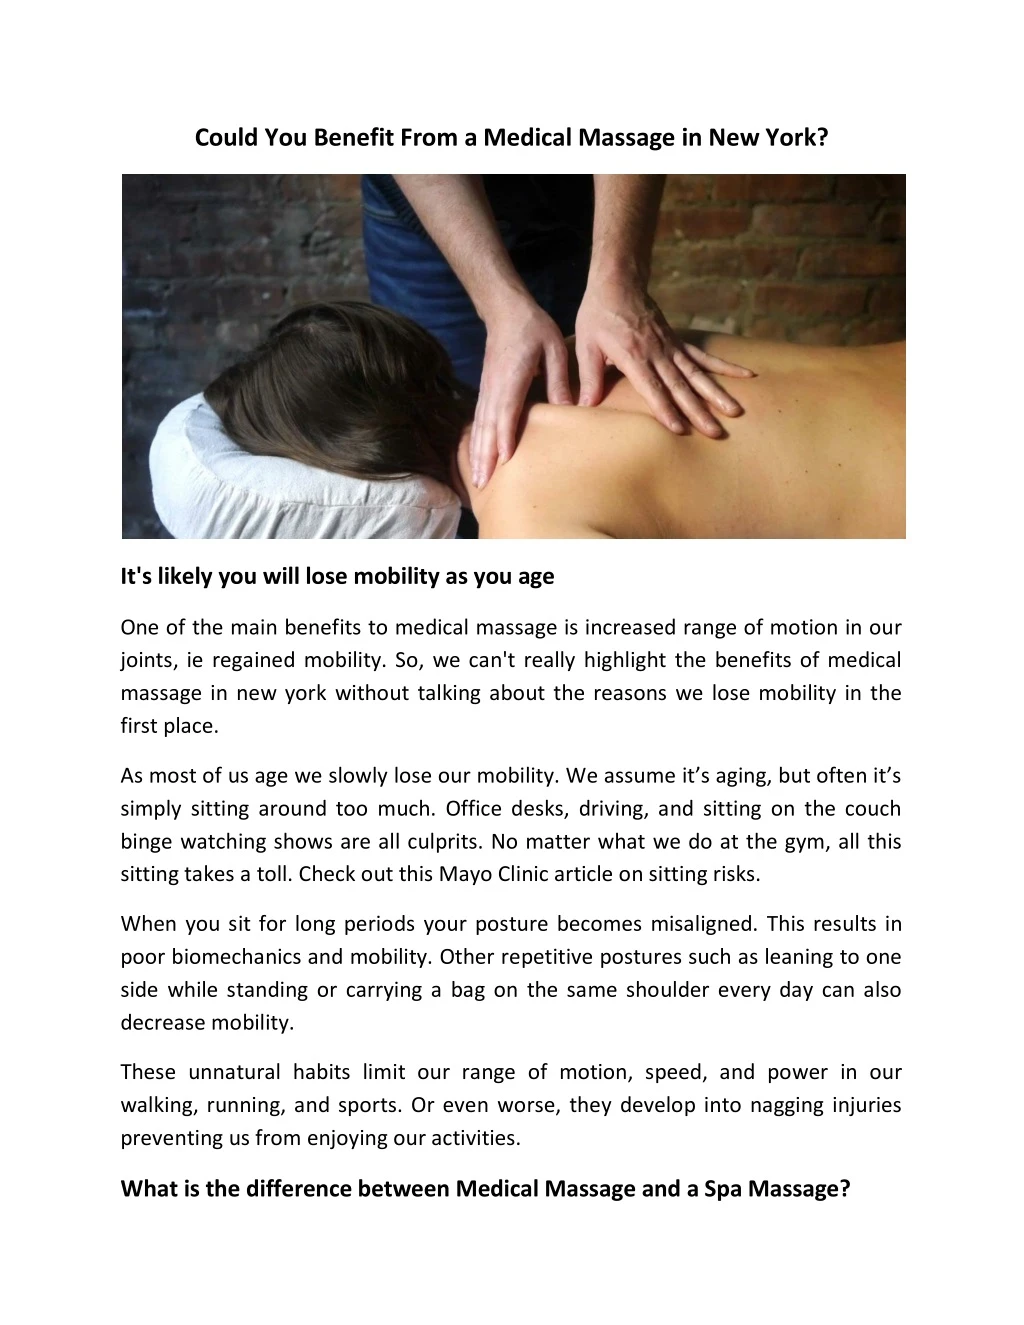 could you benefit from a medical massage